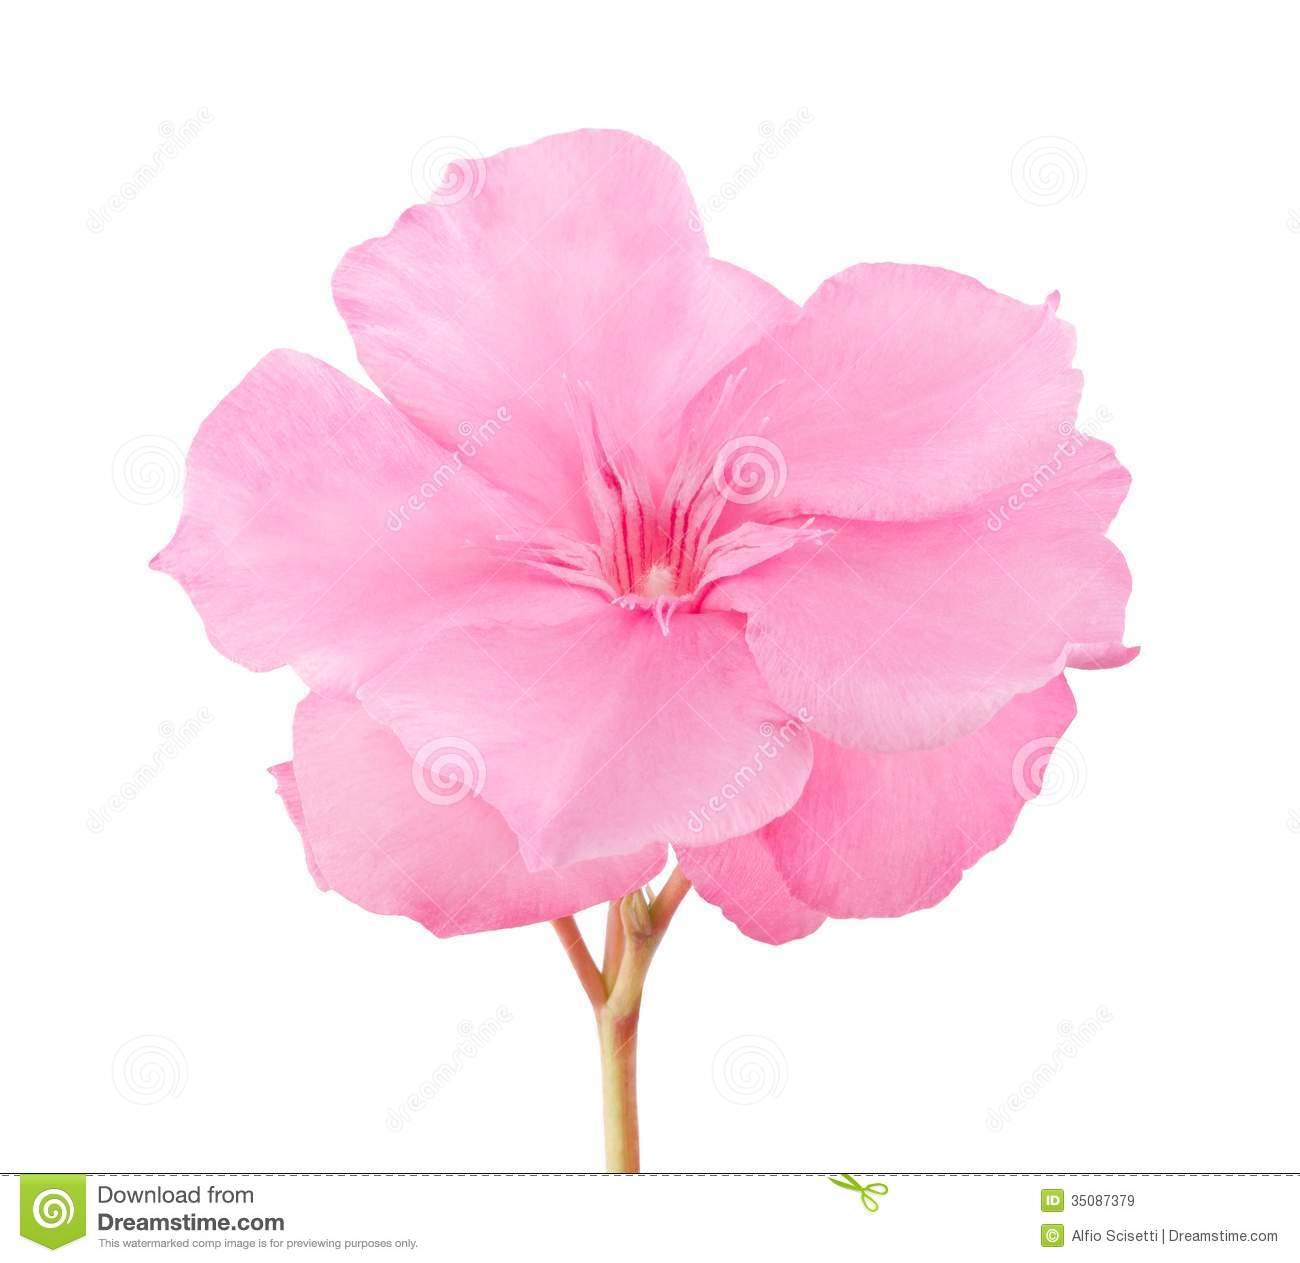 Oleander Branch Royalty Free Stock Photography.